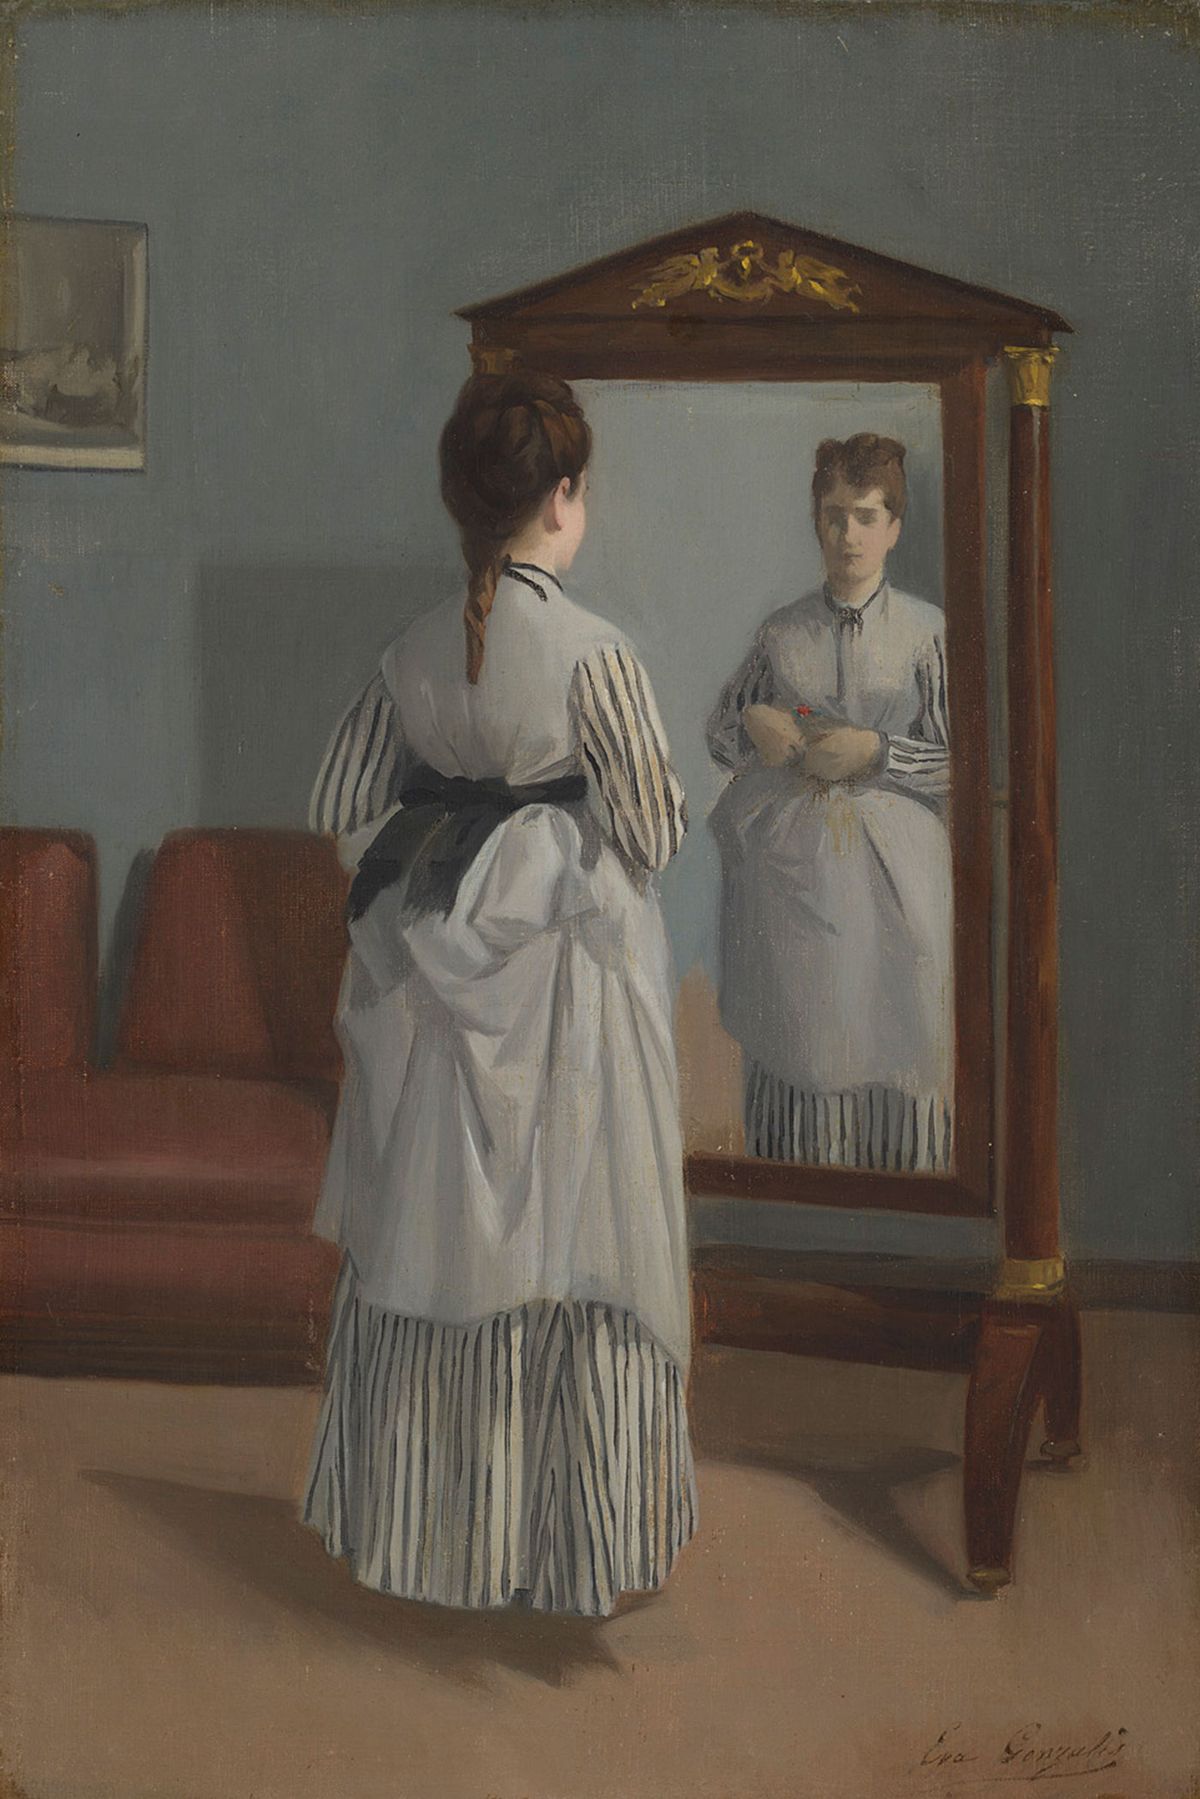 Eva Gonzalès, La Psyché (The Full-length Mirror), about 1869-70.
Image: © The National Gallery, London